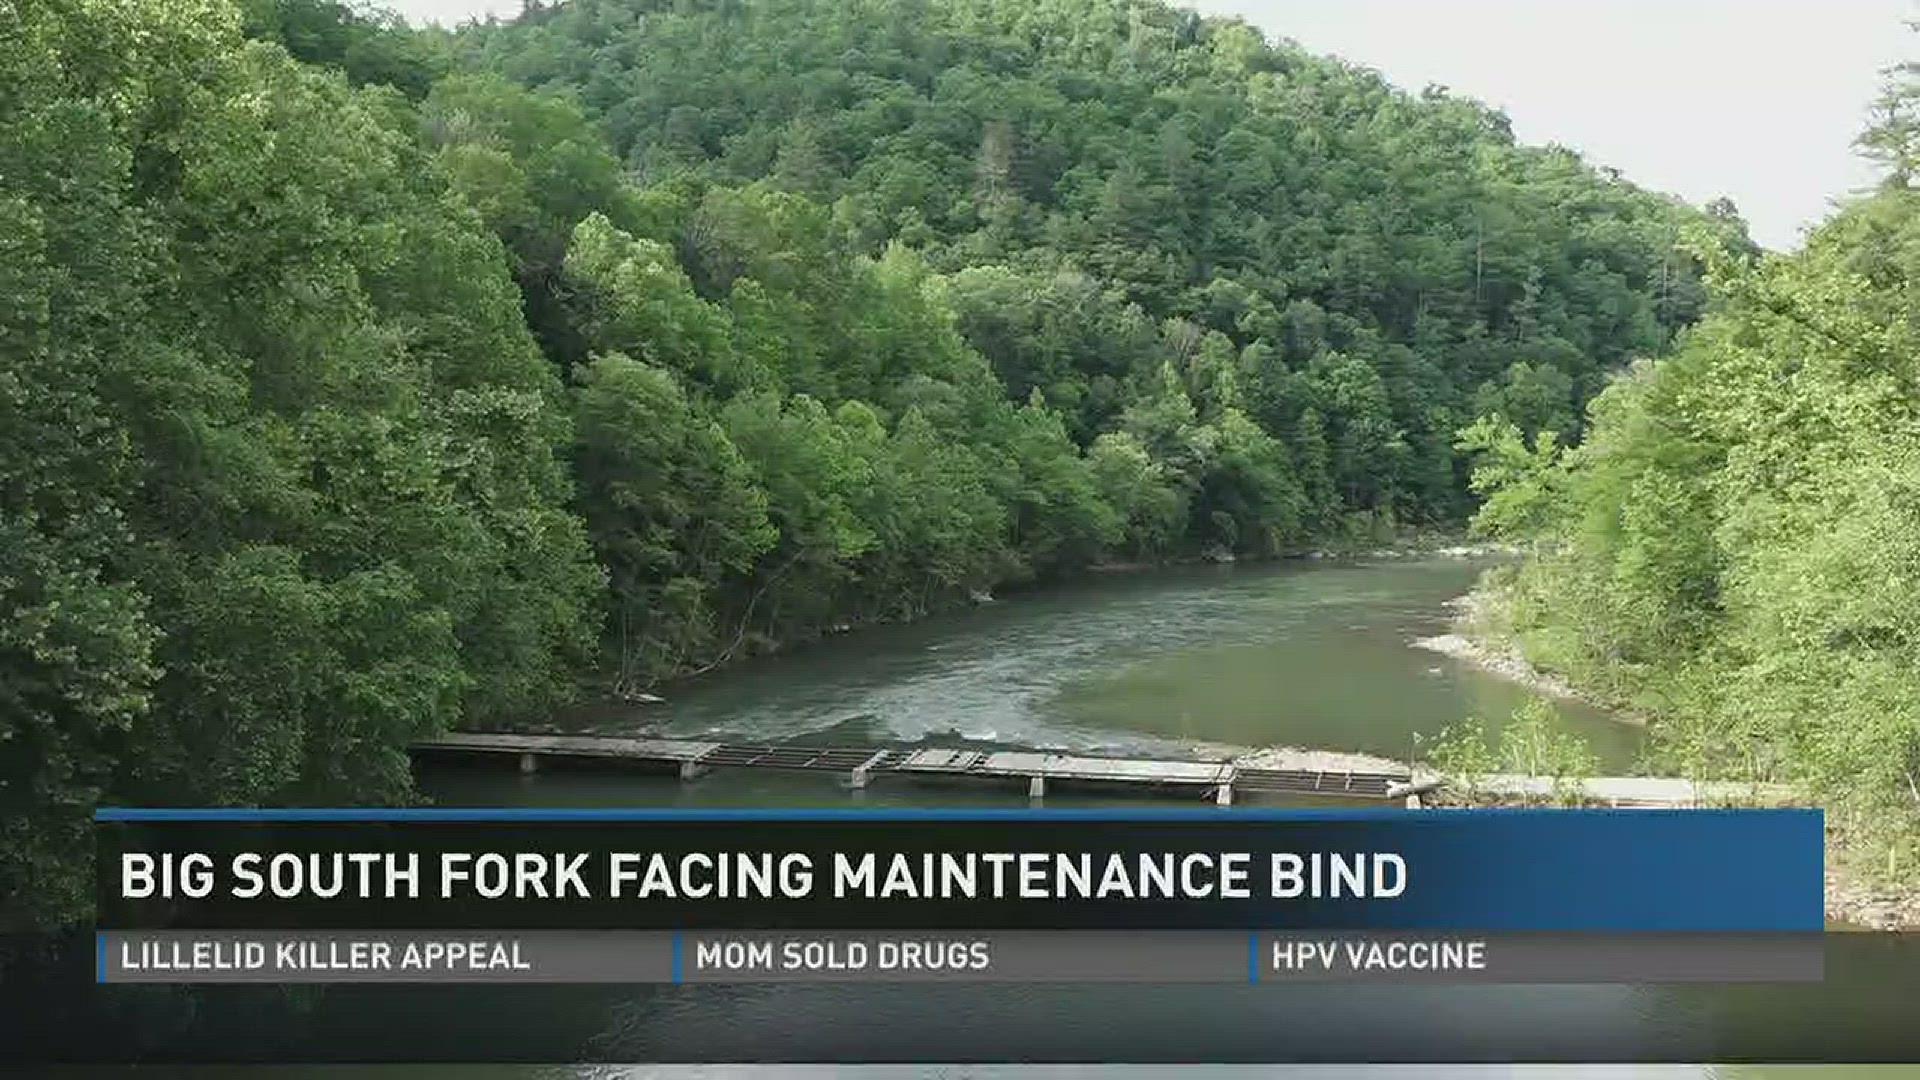 Big South Fork is facing a maintenance bind due to the backlog of the National Parks System.